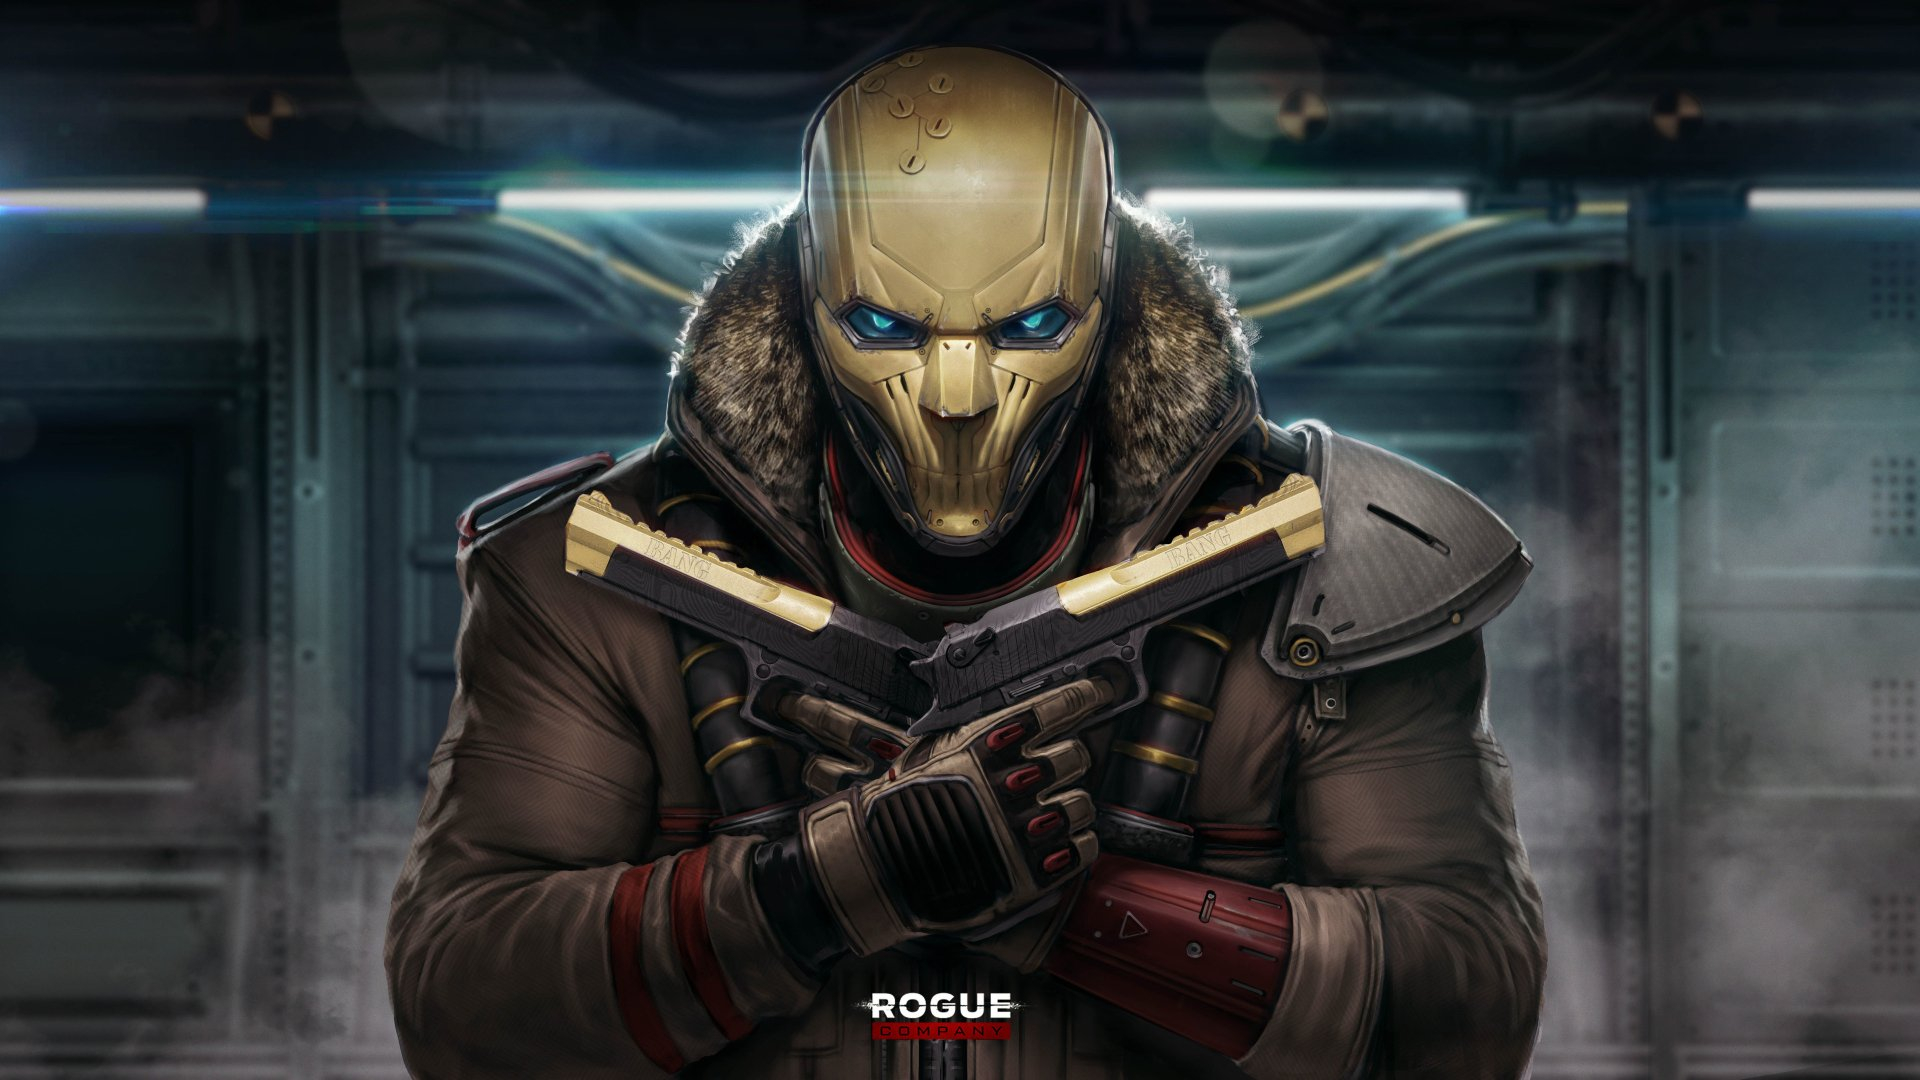 1920x1080 10+ Rogue Company HD Wallpapers and Backgrounds